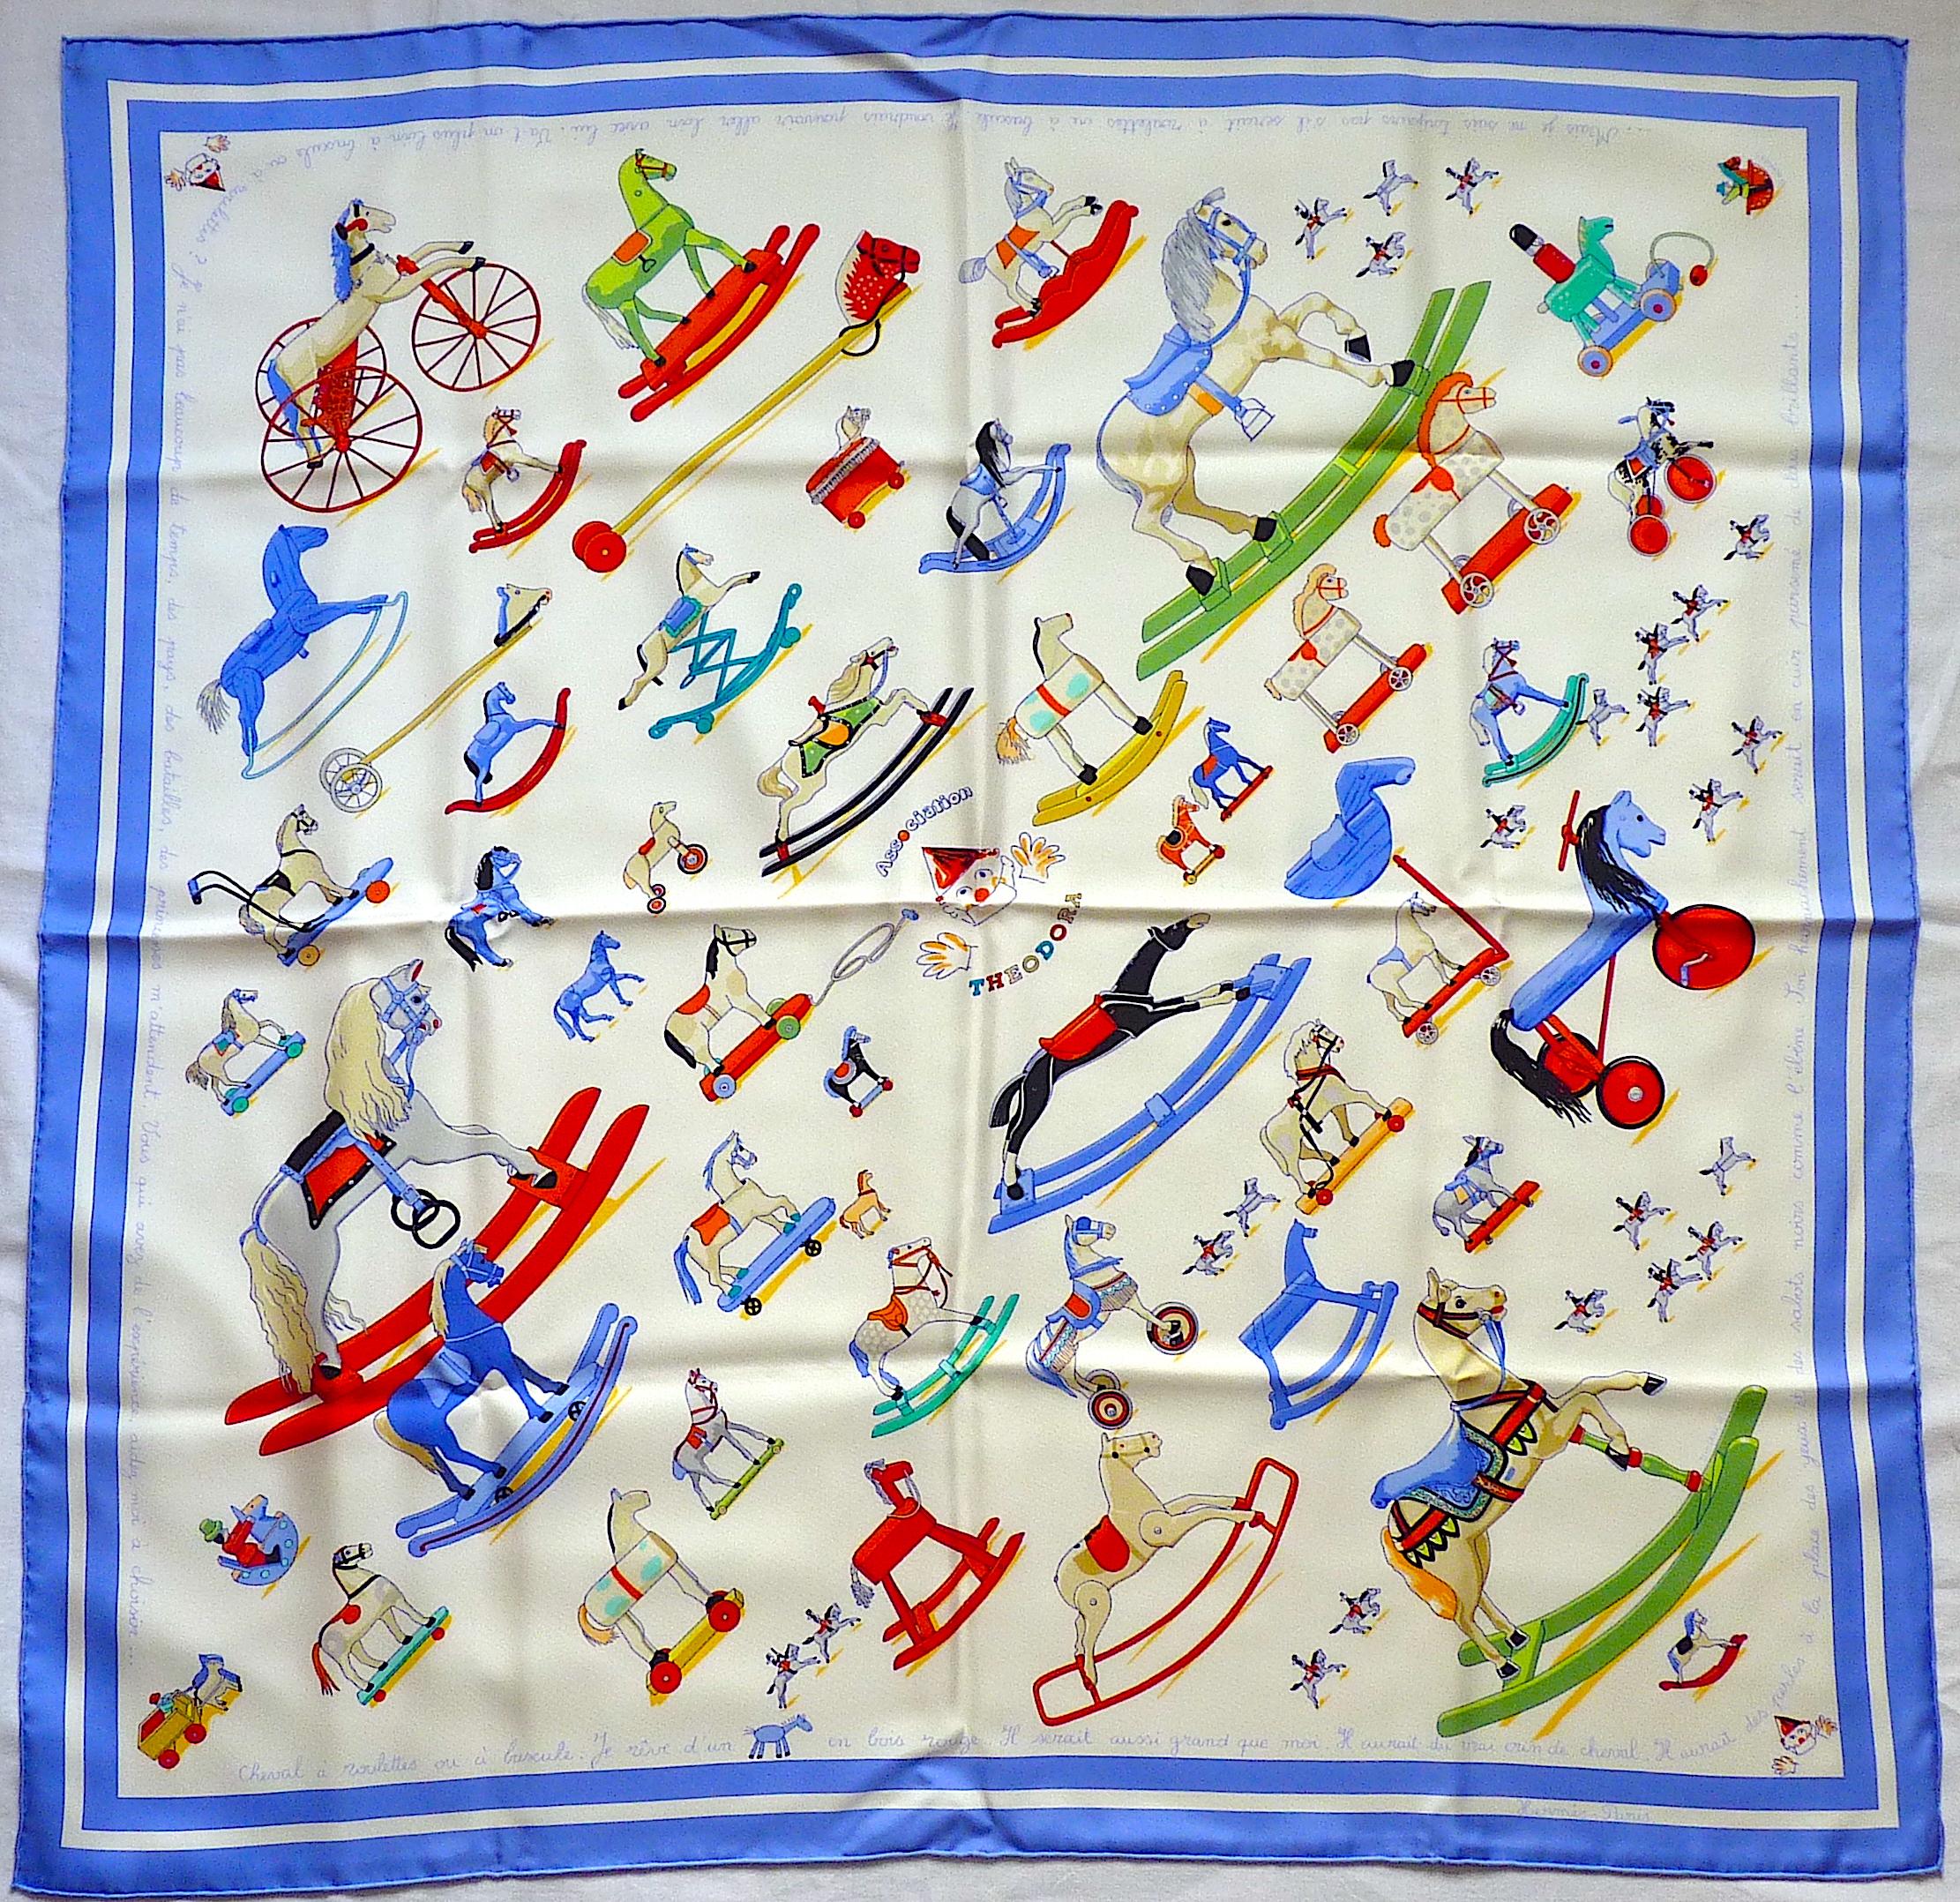 This is a very rare Hermes scarf Raconte Moi le Cheval, in a Special Edition released in 2002 for Theodora Association, Brand New in original Hermès Box with Papers.

Year 1999, published in support of the Theodora Foundation.
The Theodora